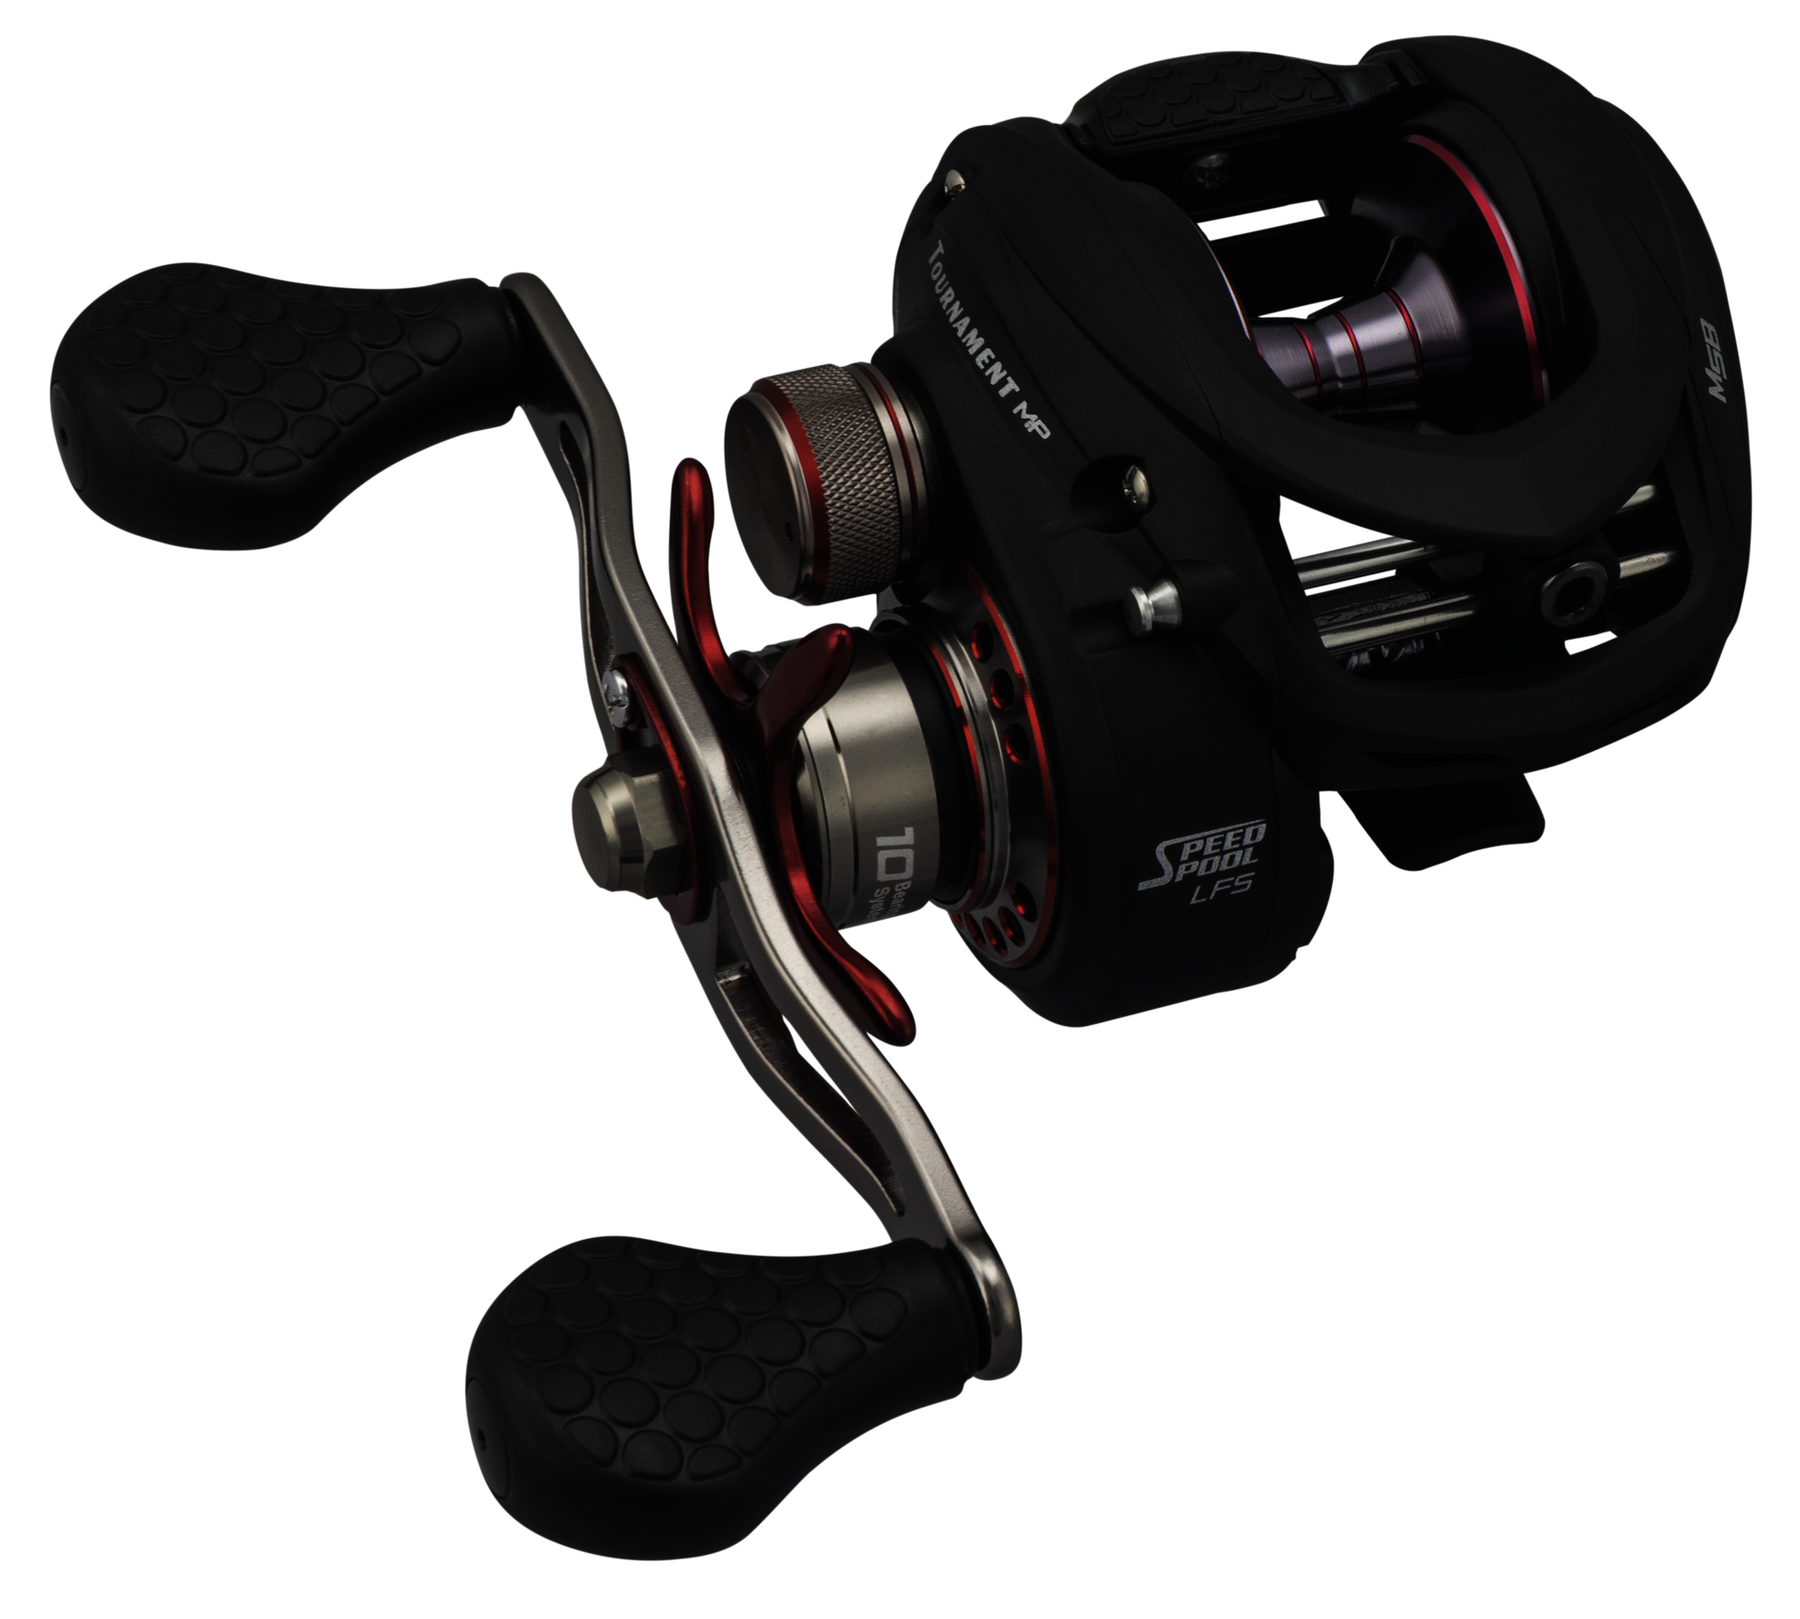 LEW'S TOURNAMENT MP SPEED SPOOL LFS CASTING REELS – The Bass Hole